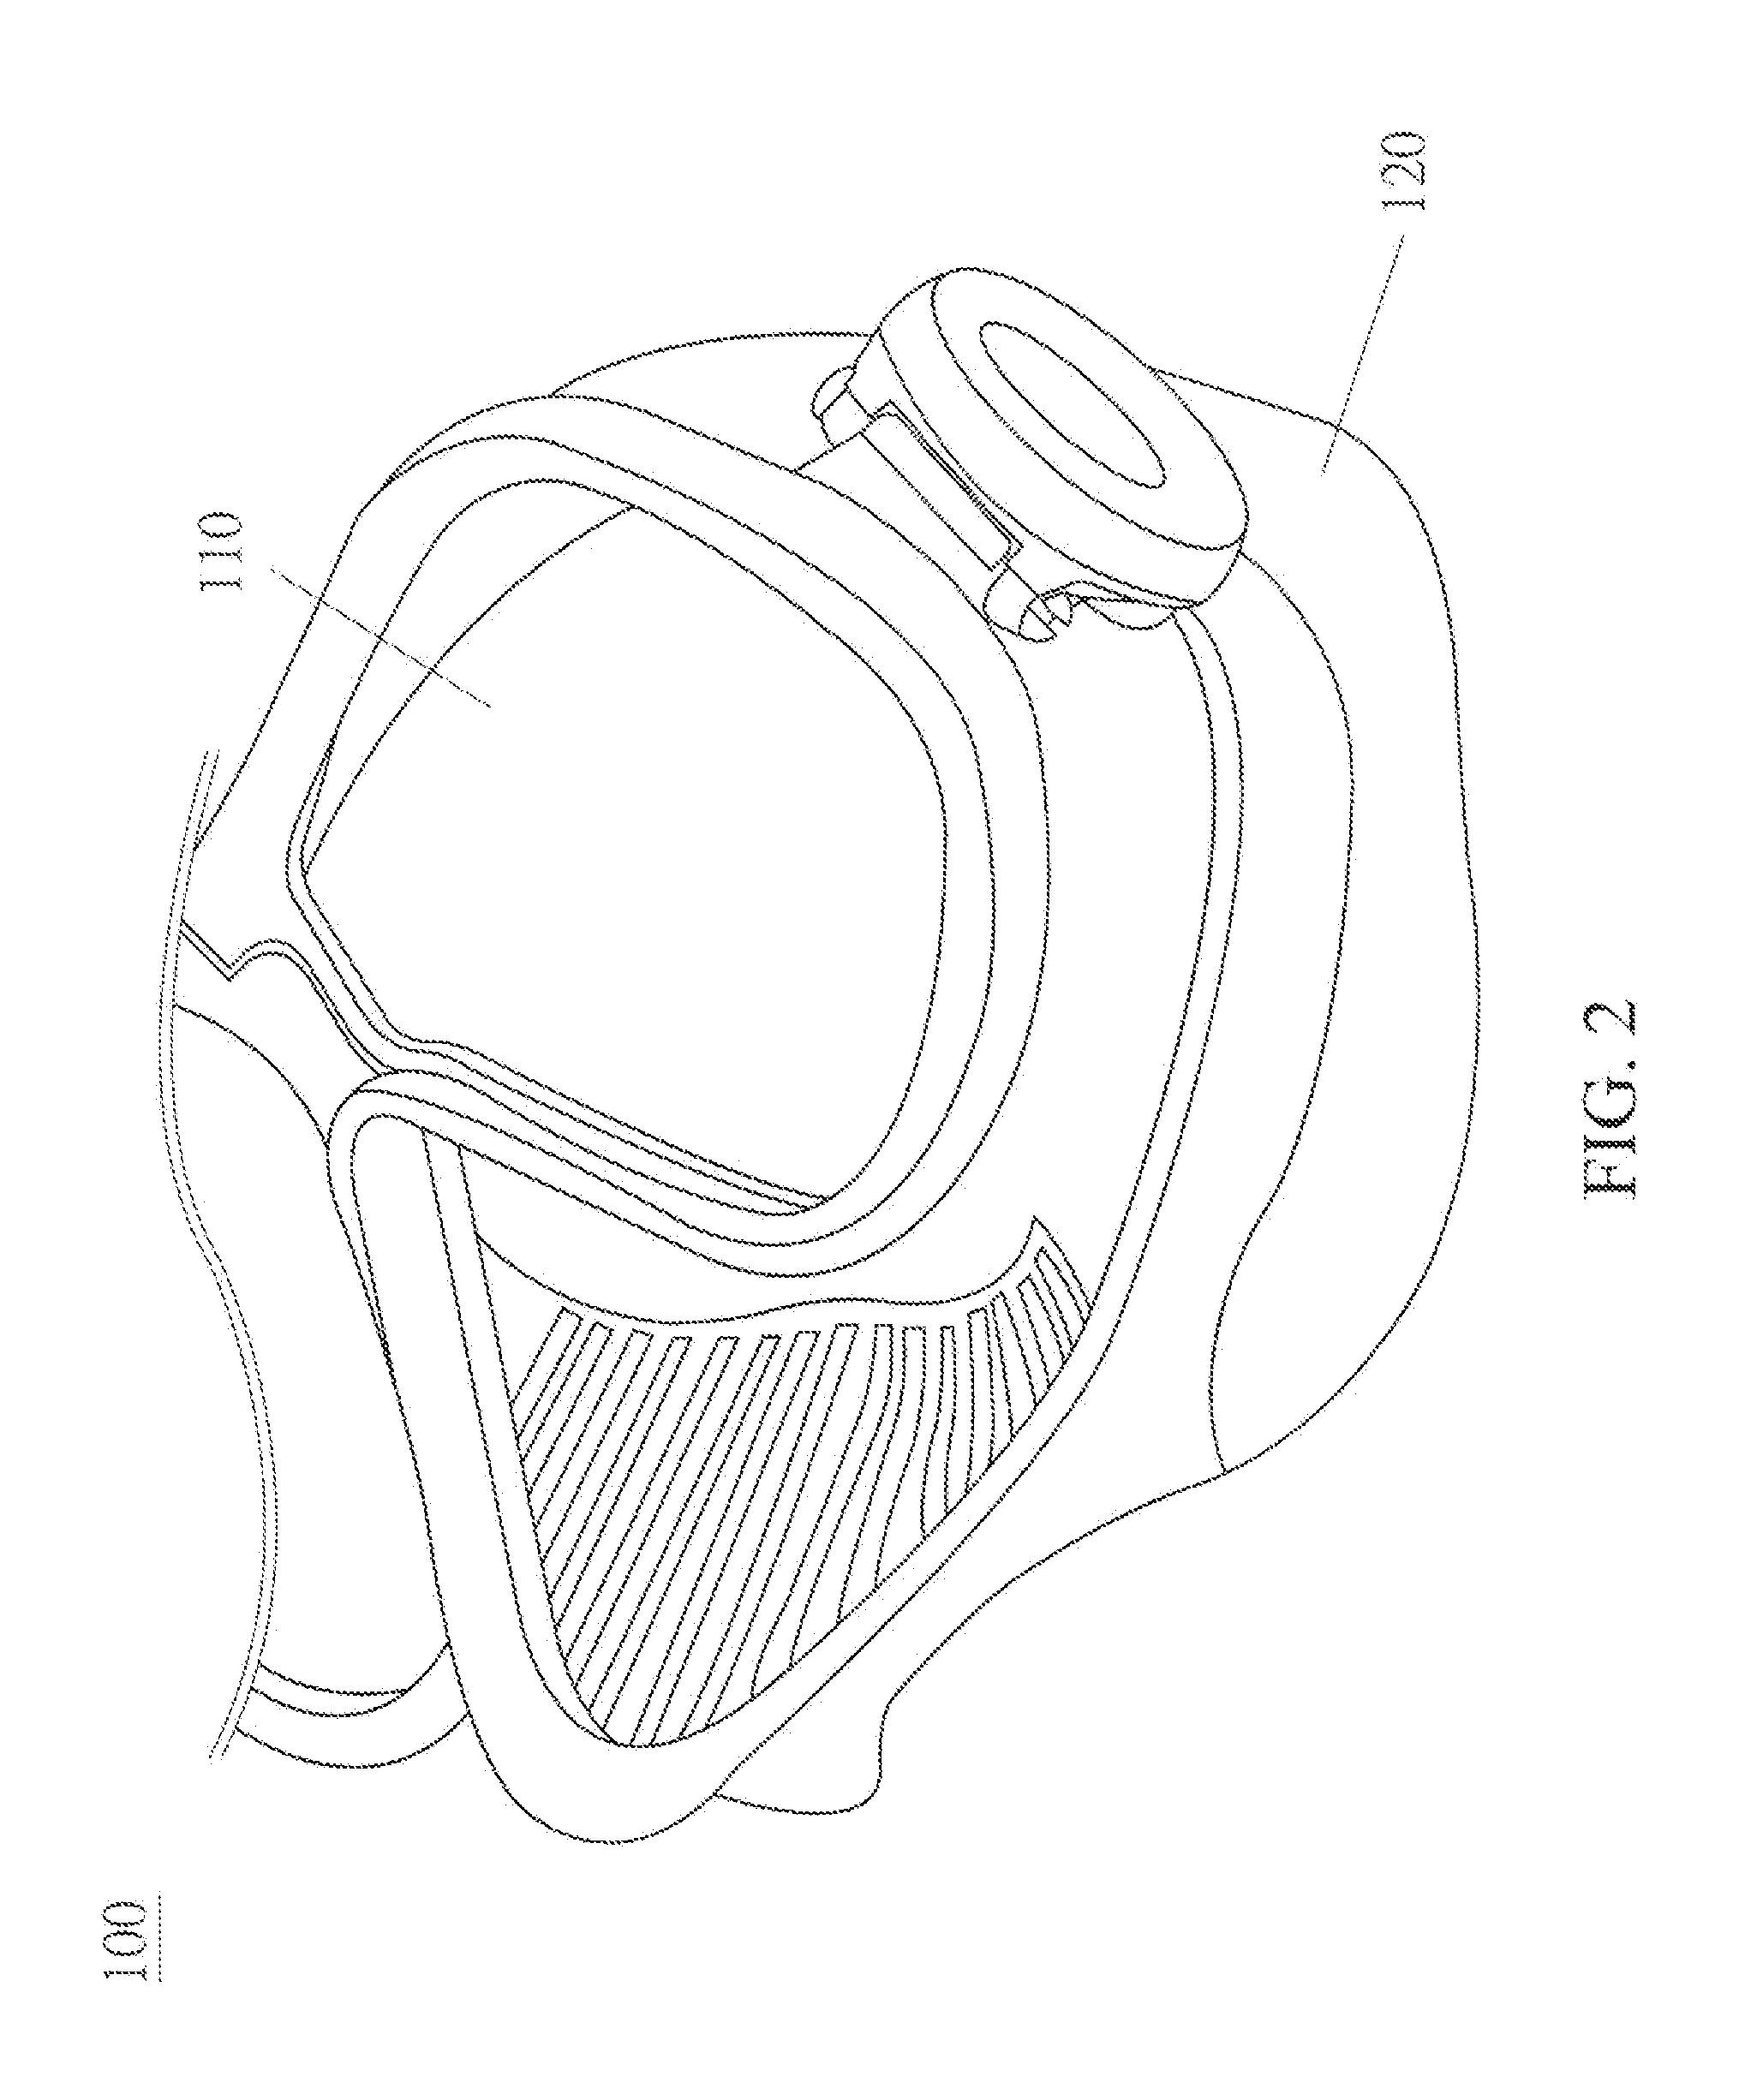 Mask Structure Without an Inner Waterproof Ring